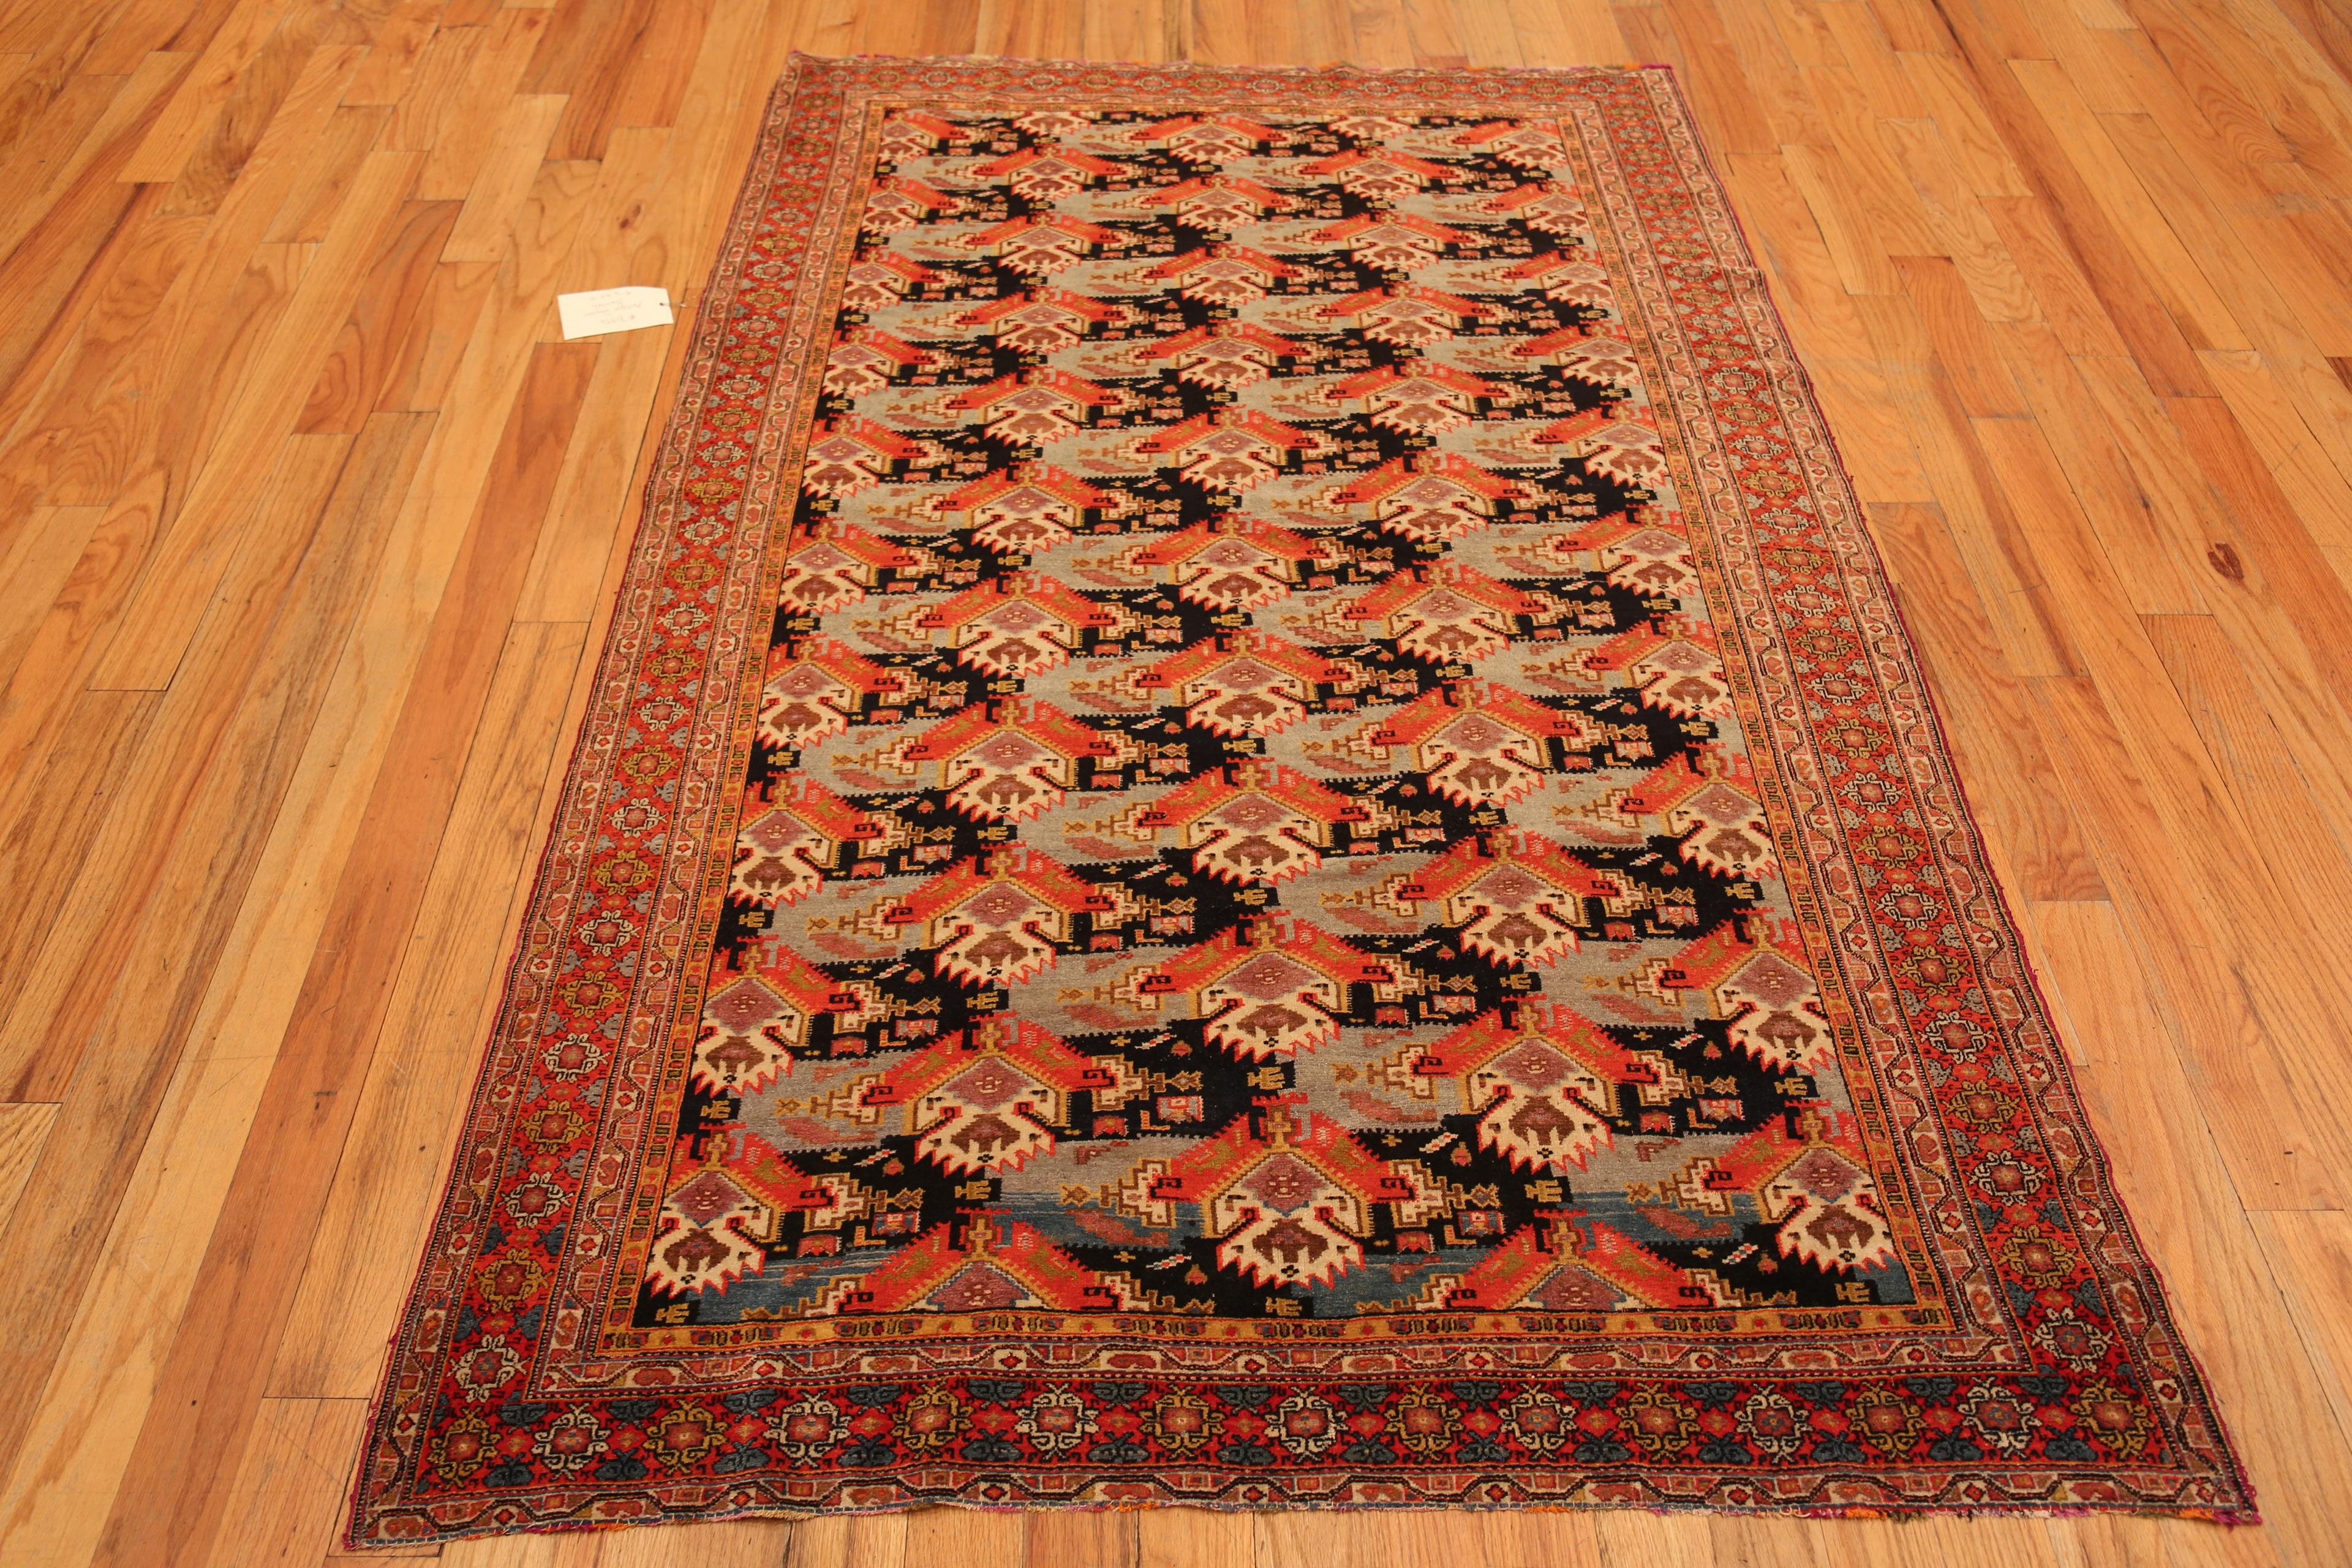 Antique Persian Senneh Rug, Country of Origin: Persia, Circa date: 1880. Size: 4 ft 6 in x 6 ft 11 in (1.37 m x 2.11 m)
 